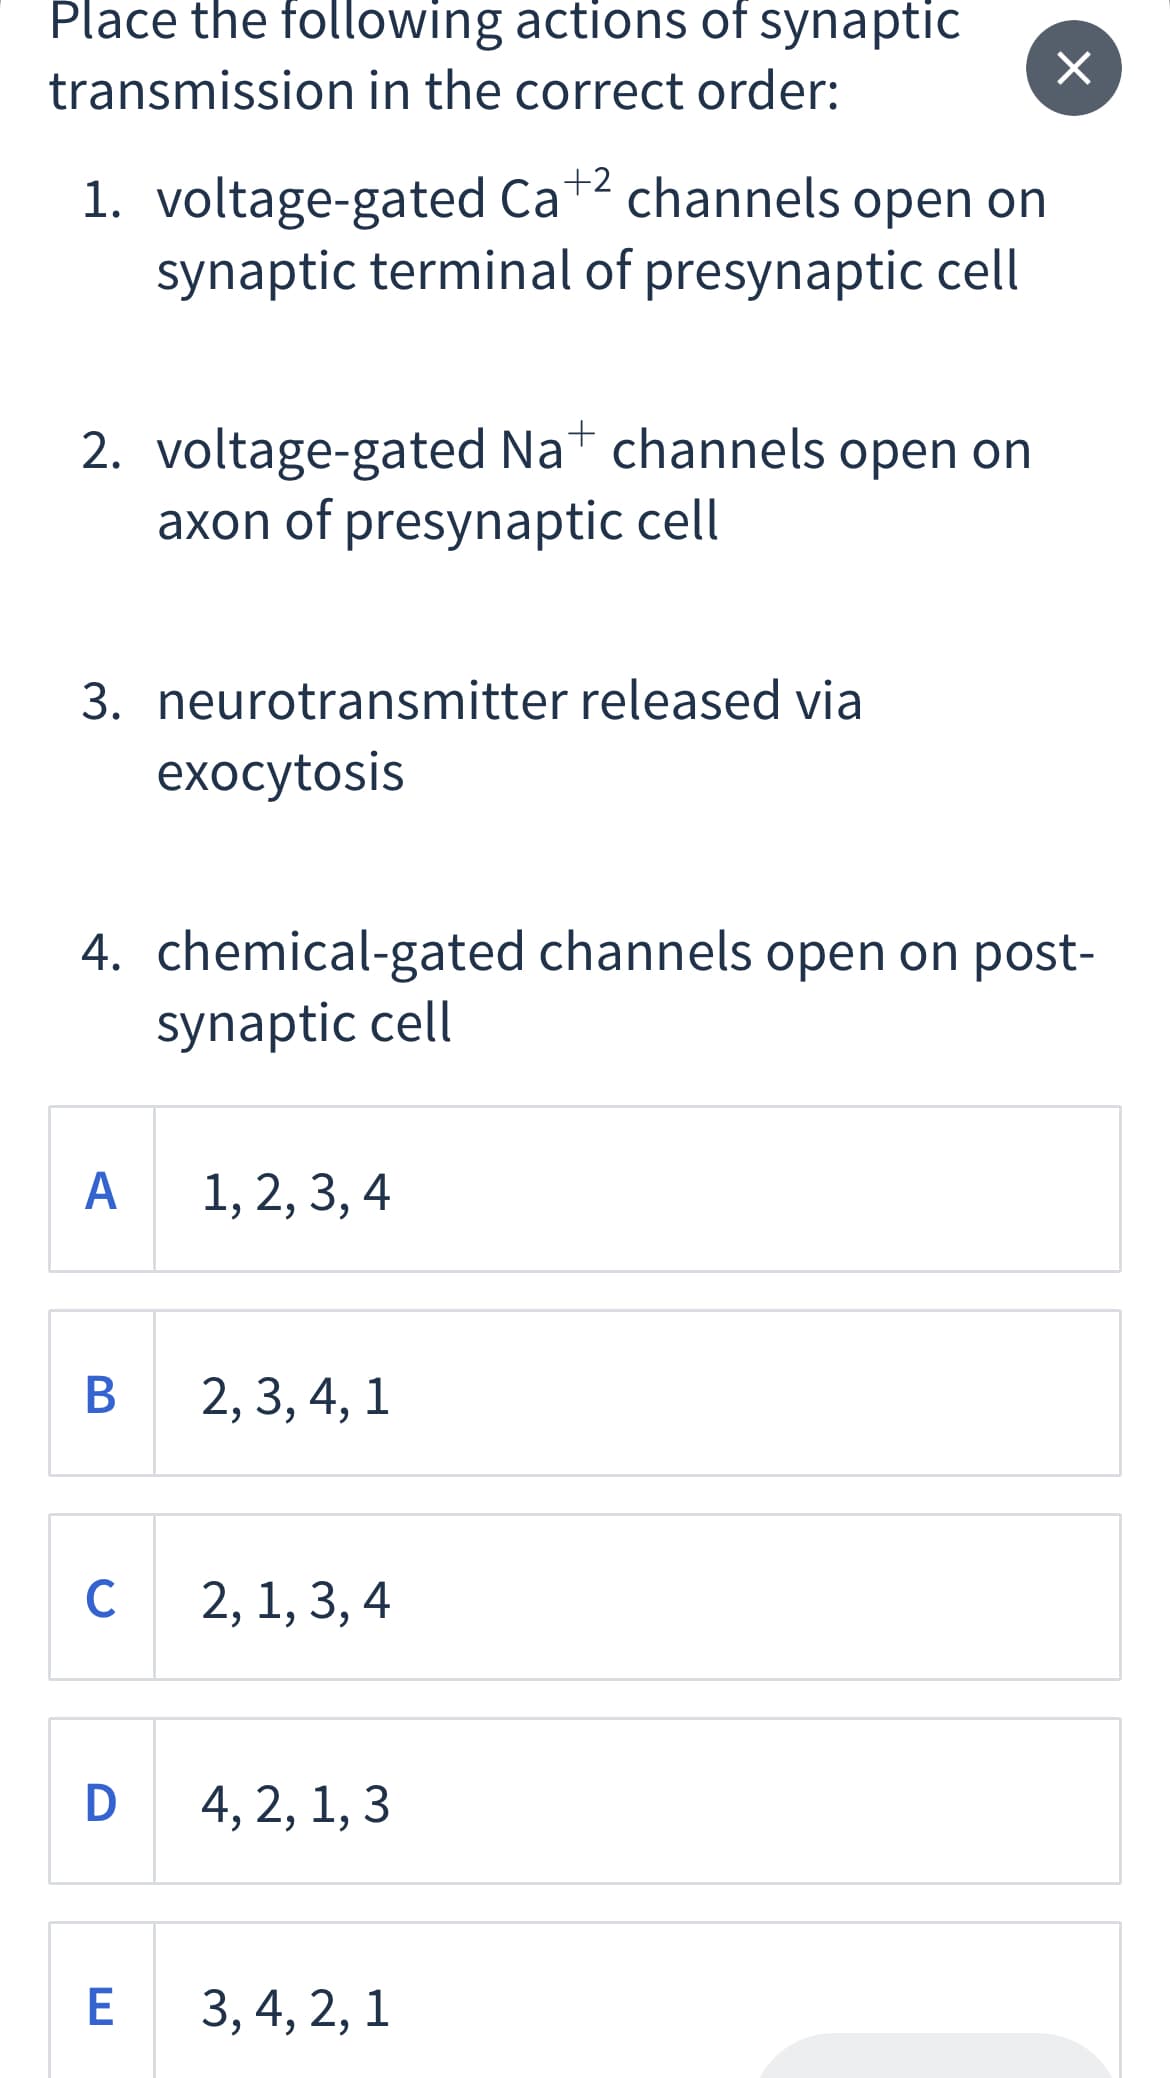 Place the following actions of synaptic
transmission in the correct order:
1. voltage-gated Ca+2
synaptic terminal of presynaptic cell
channels open on
2. voltage-gated Nat channels open on
axon of presynaptic cell
3. neurotransmitter released via
exоcytosis
4. chemical-gated channels open on post-
synaptic cell
A 1, 2, 3, 4
В
2, 3, 4, 1
C
2, 1, 3, 4
D 4, 2, 1, 3
3, 4, 2, 1
6.
